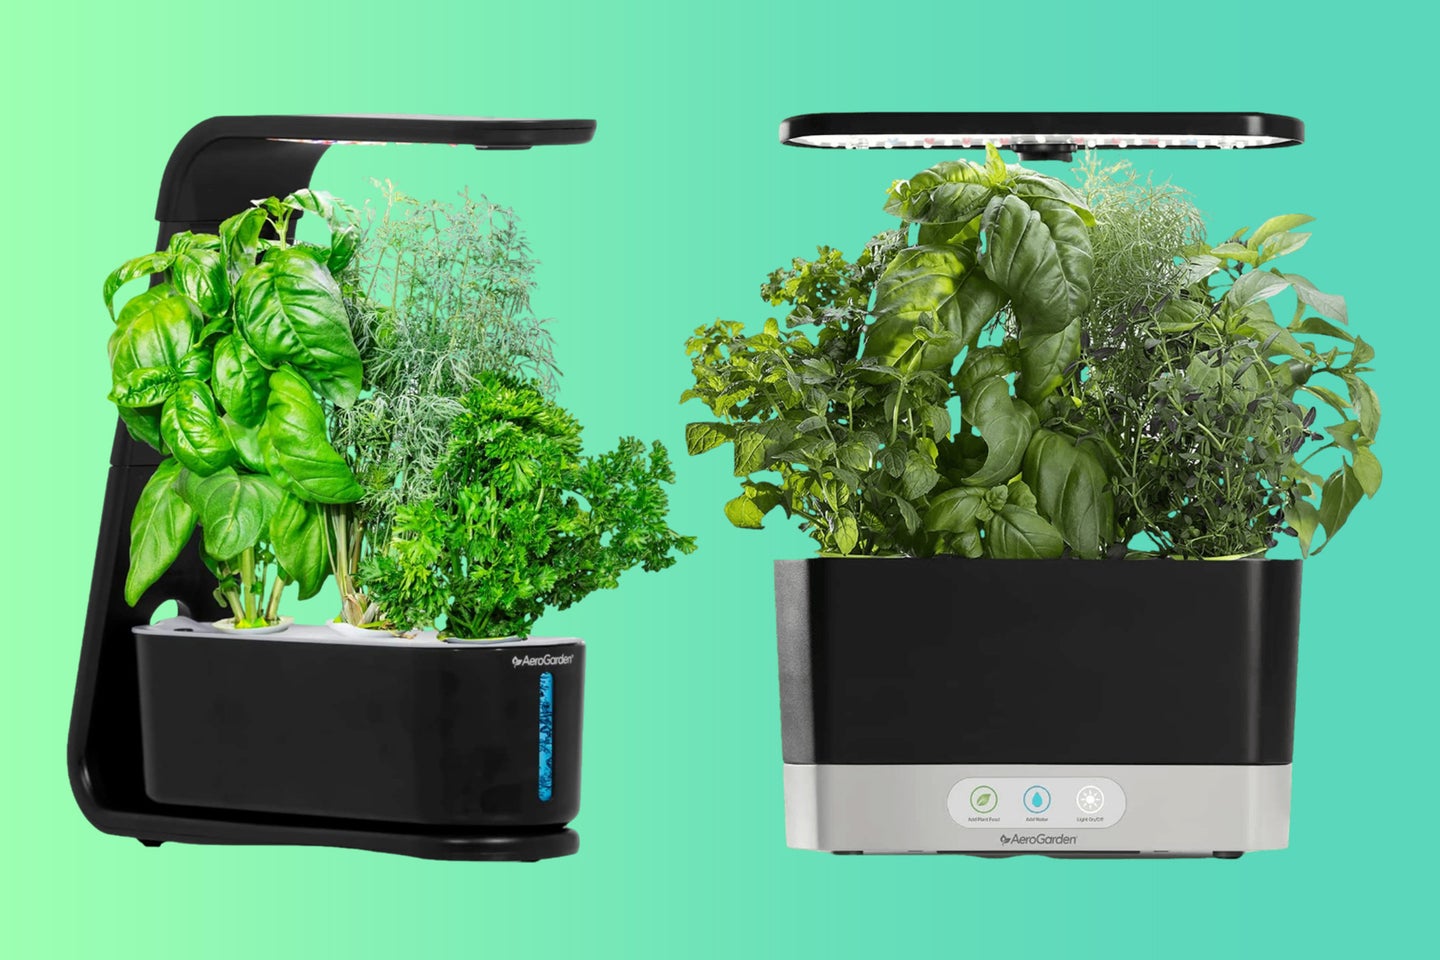 Two AeroGarden HydroPonic growers on a green gradient background